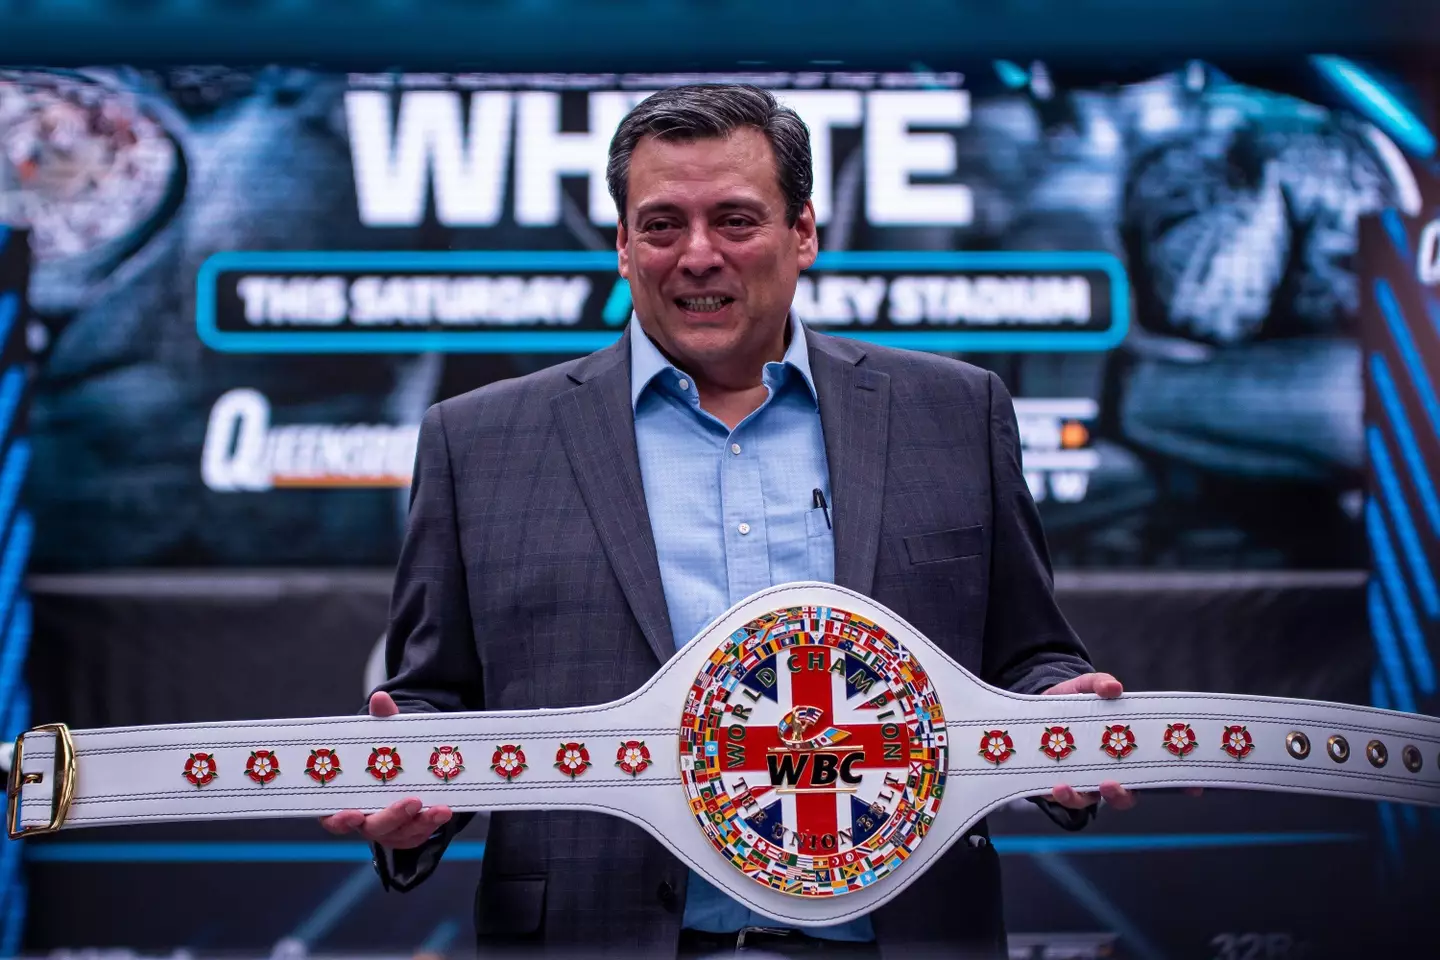 Suliaman unveiling a new belt ahead of Tyson Fury's world title defence against Dillian Whyte back in April. Image: Alamy